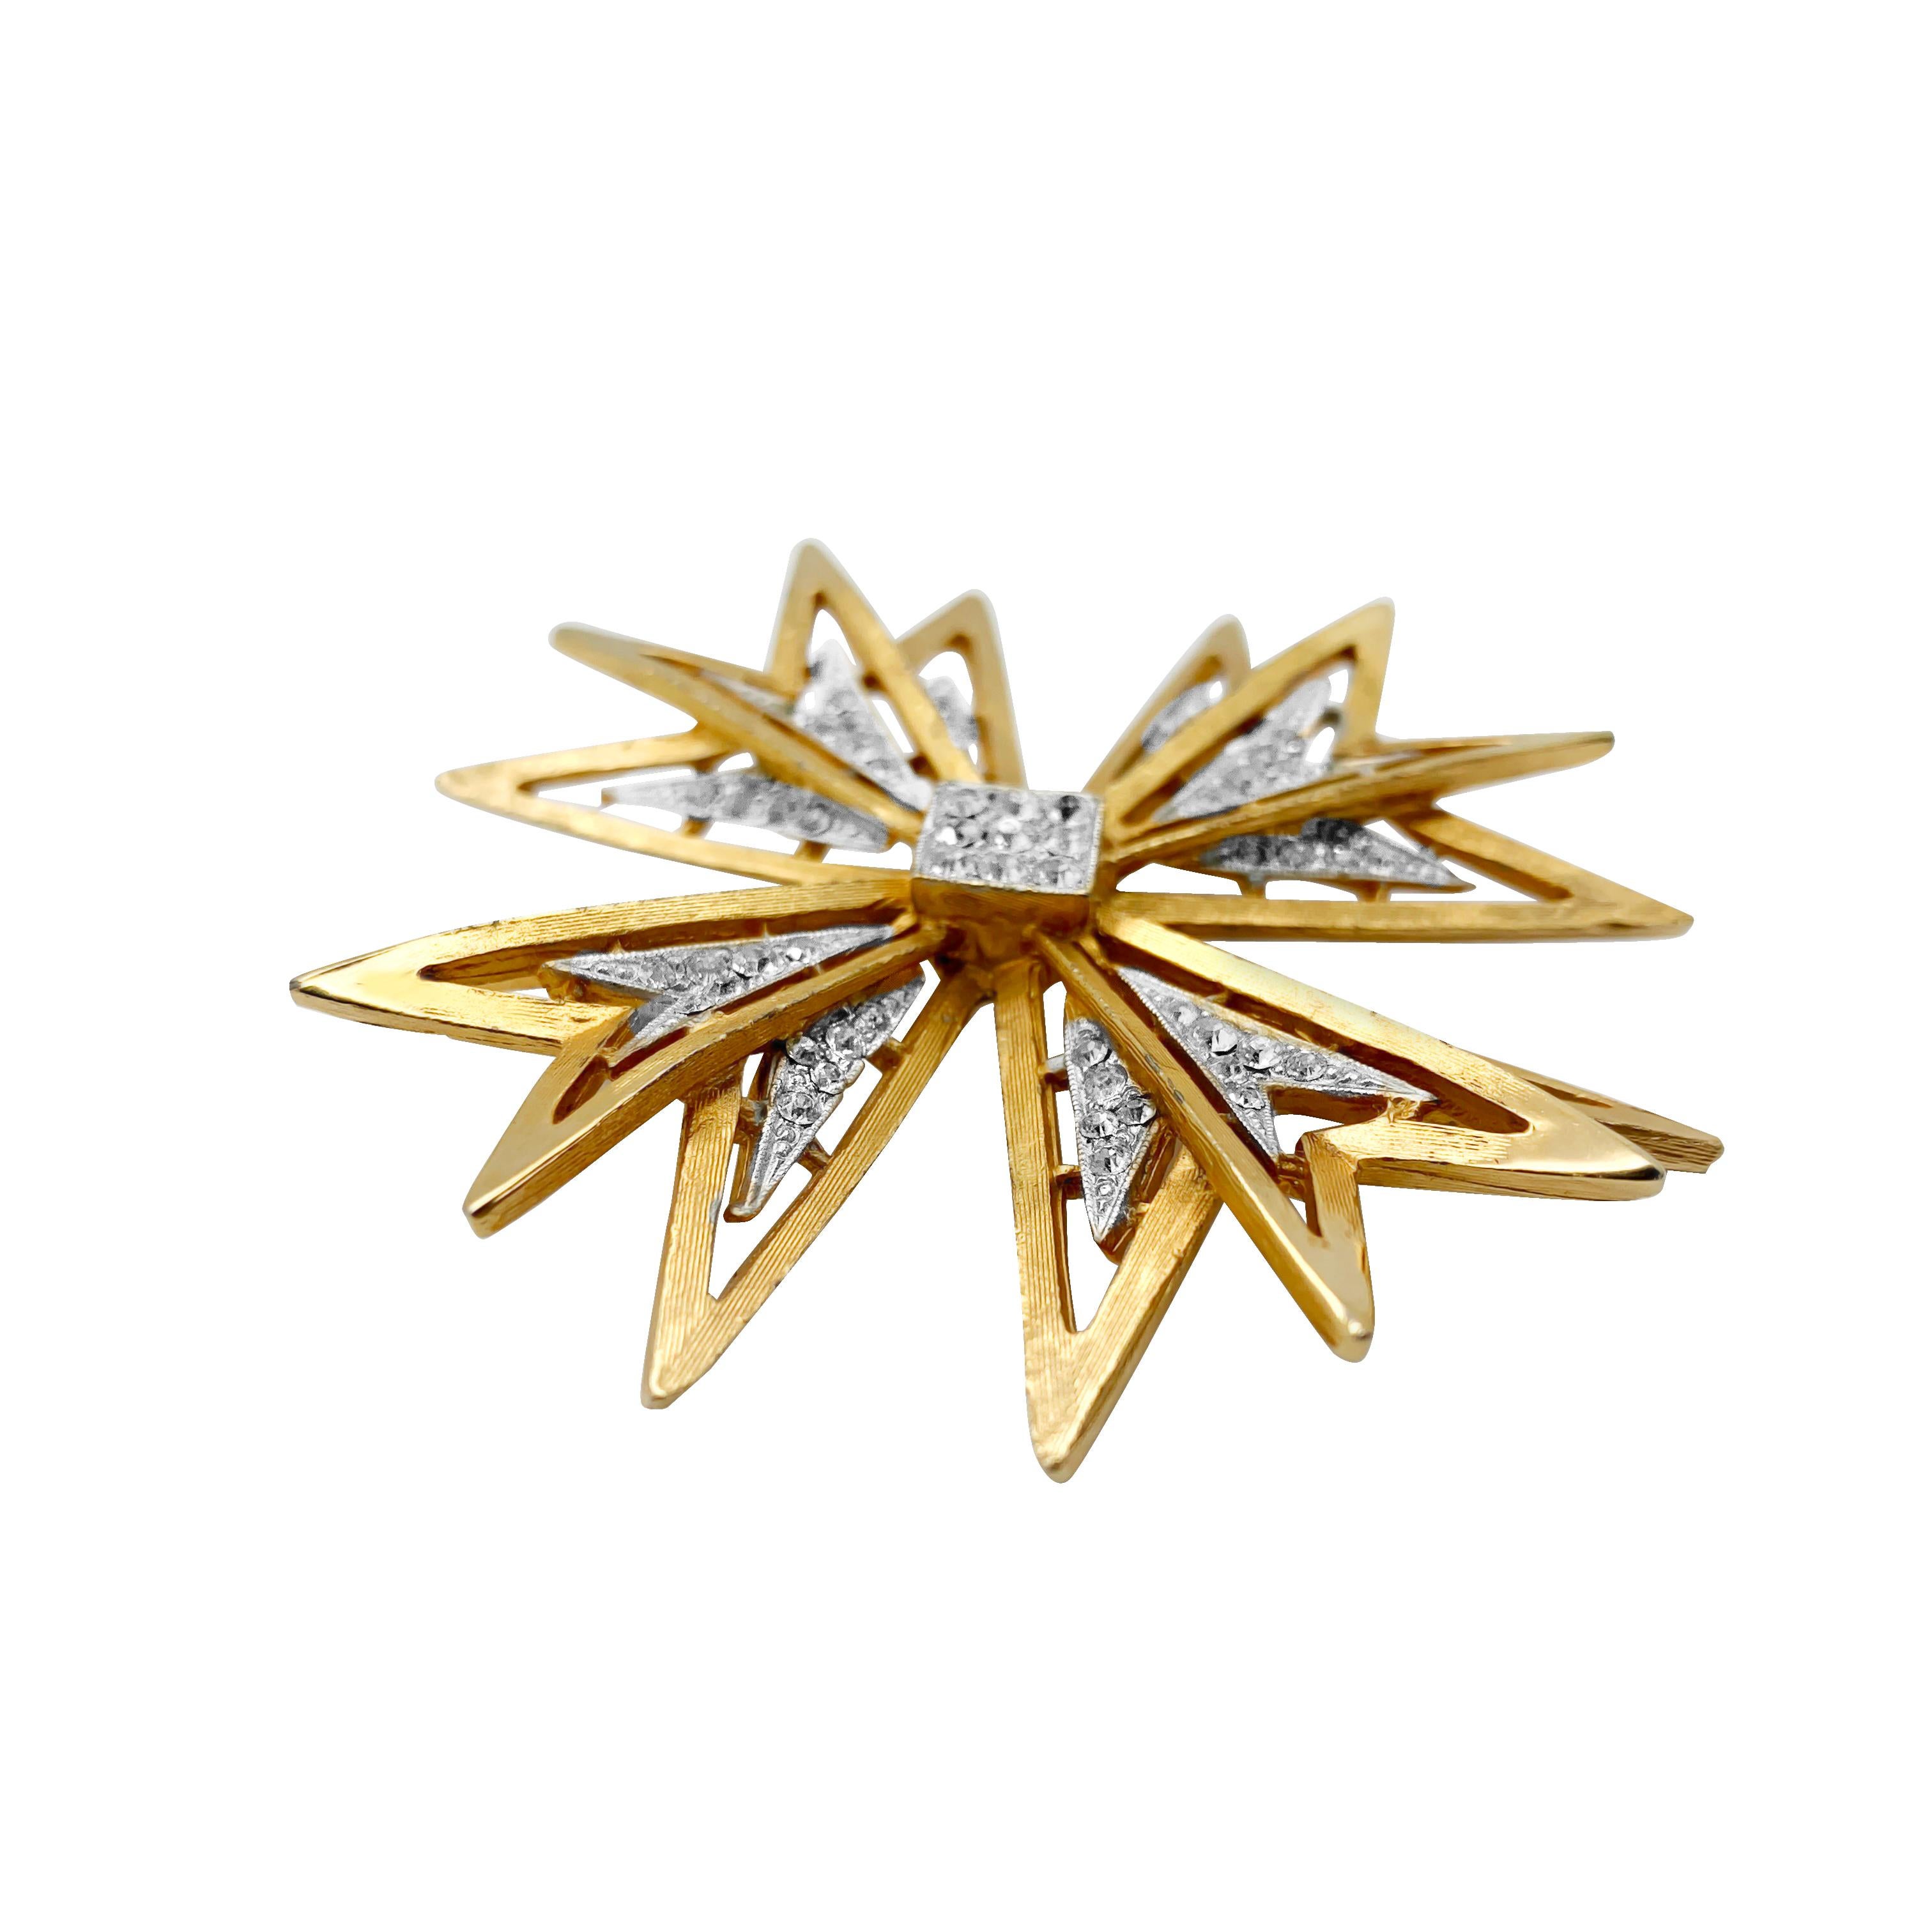 A large vintage Capri Maltese Cross brooch. Featuring a fabulously statement sculptural Maltese cross in brushed metal set with crystal accents. 
Vintage Condition: Very good without damage or noteworthy wear. 
Materials: gold plated metal, glass